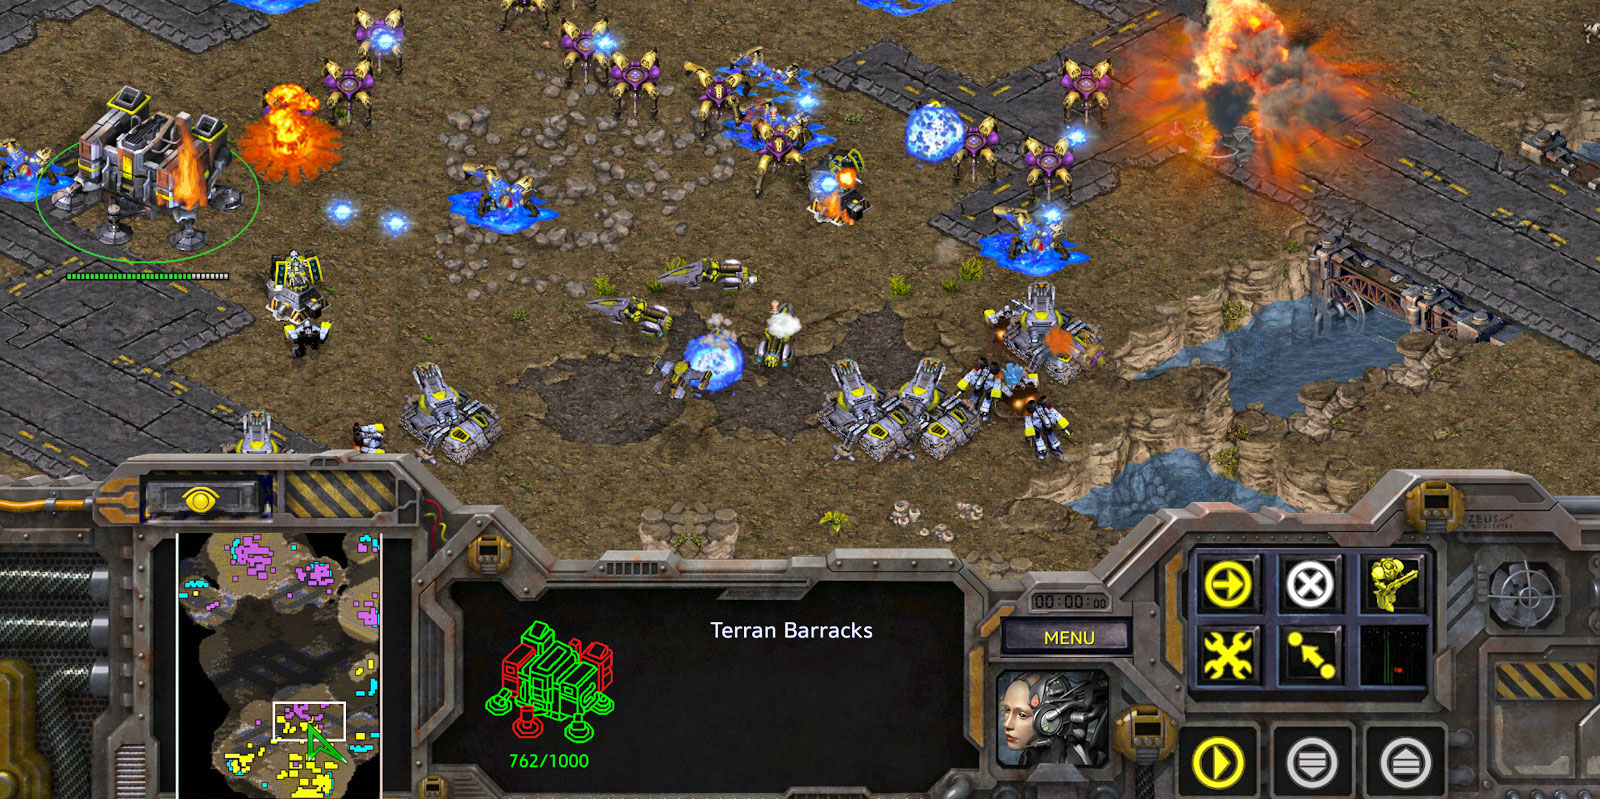 StarCraft gets remastered for Mac in full 4K, coming in August - 9to5Mac